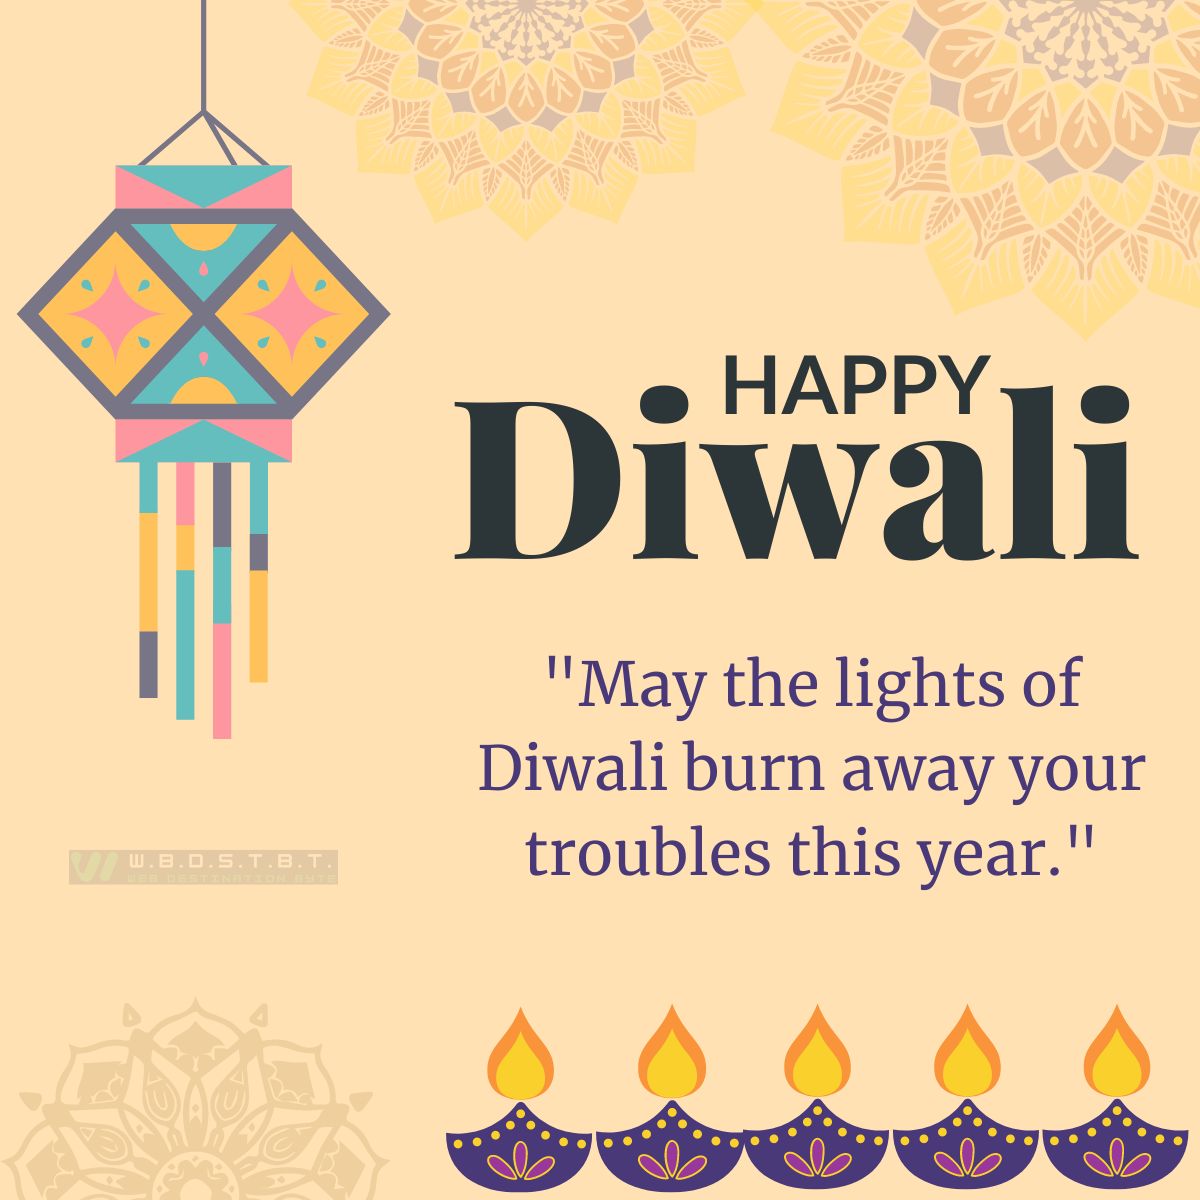 "May the lights of Diwali burn away your troubles this year."